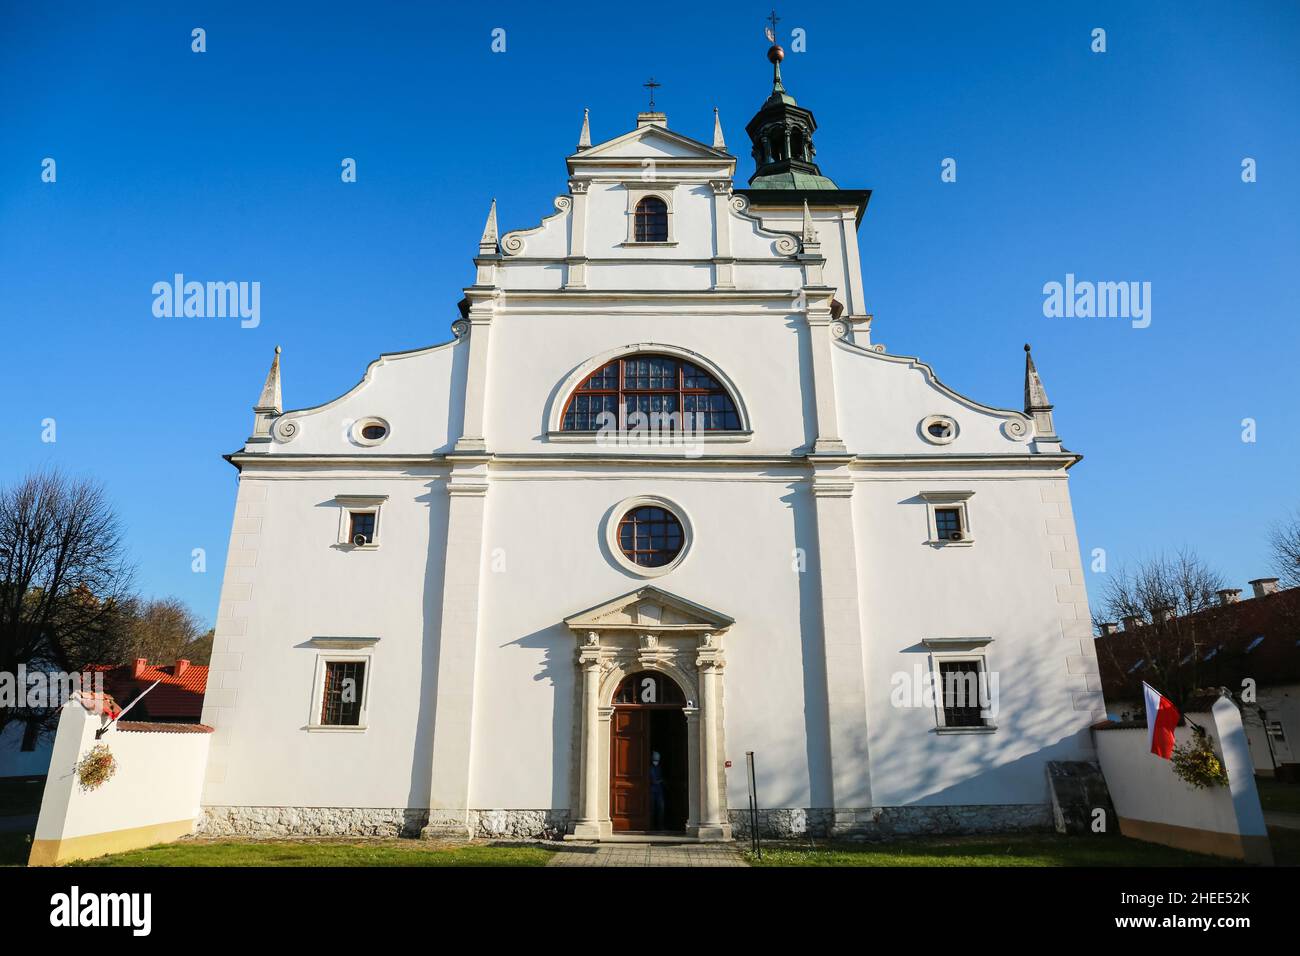 Rytwiany, Poland. 11 November 2021. Historic Church in the Golden Forest Hermitage in Rytwiany. Credit: Waldemar Sikora Stock Photo